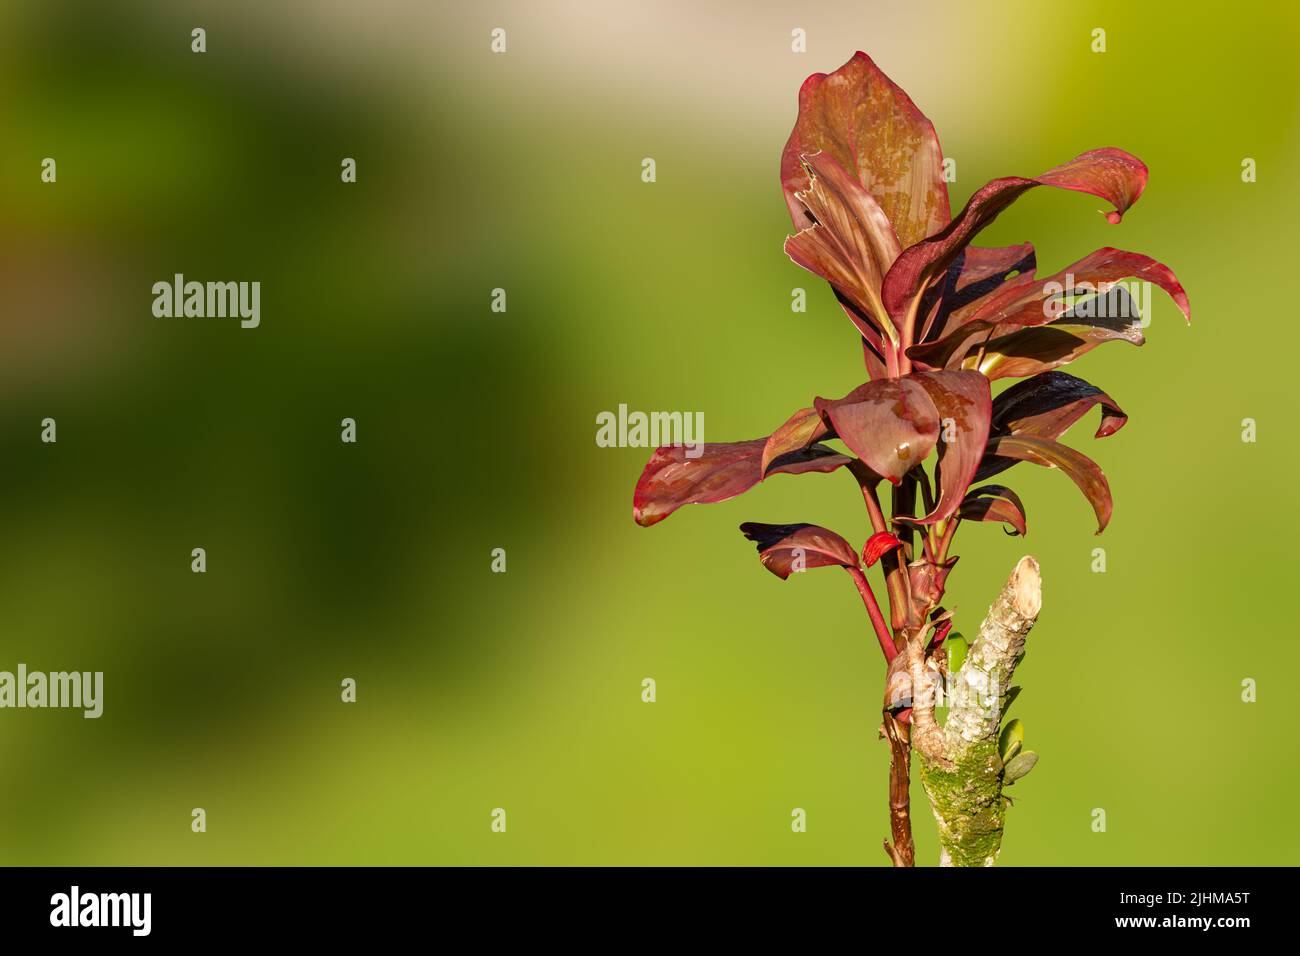 Broadleaf palm lily plant which has a combination of green and red leaf colors, natural vegetation of tropical forests Stock Photo